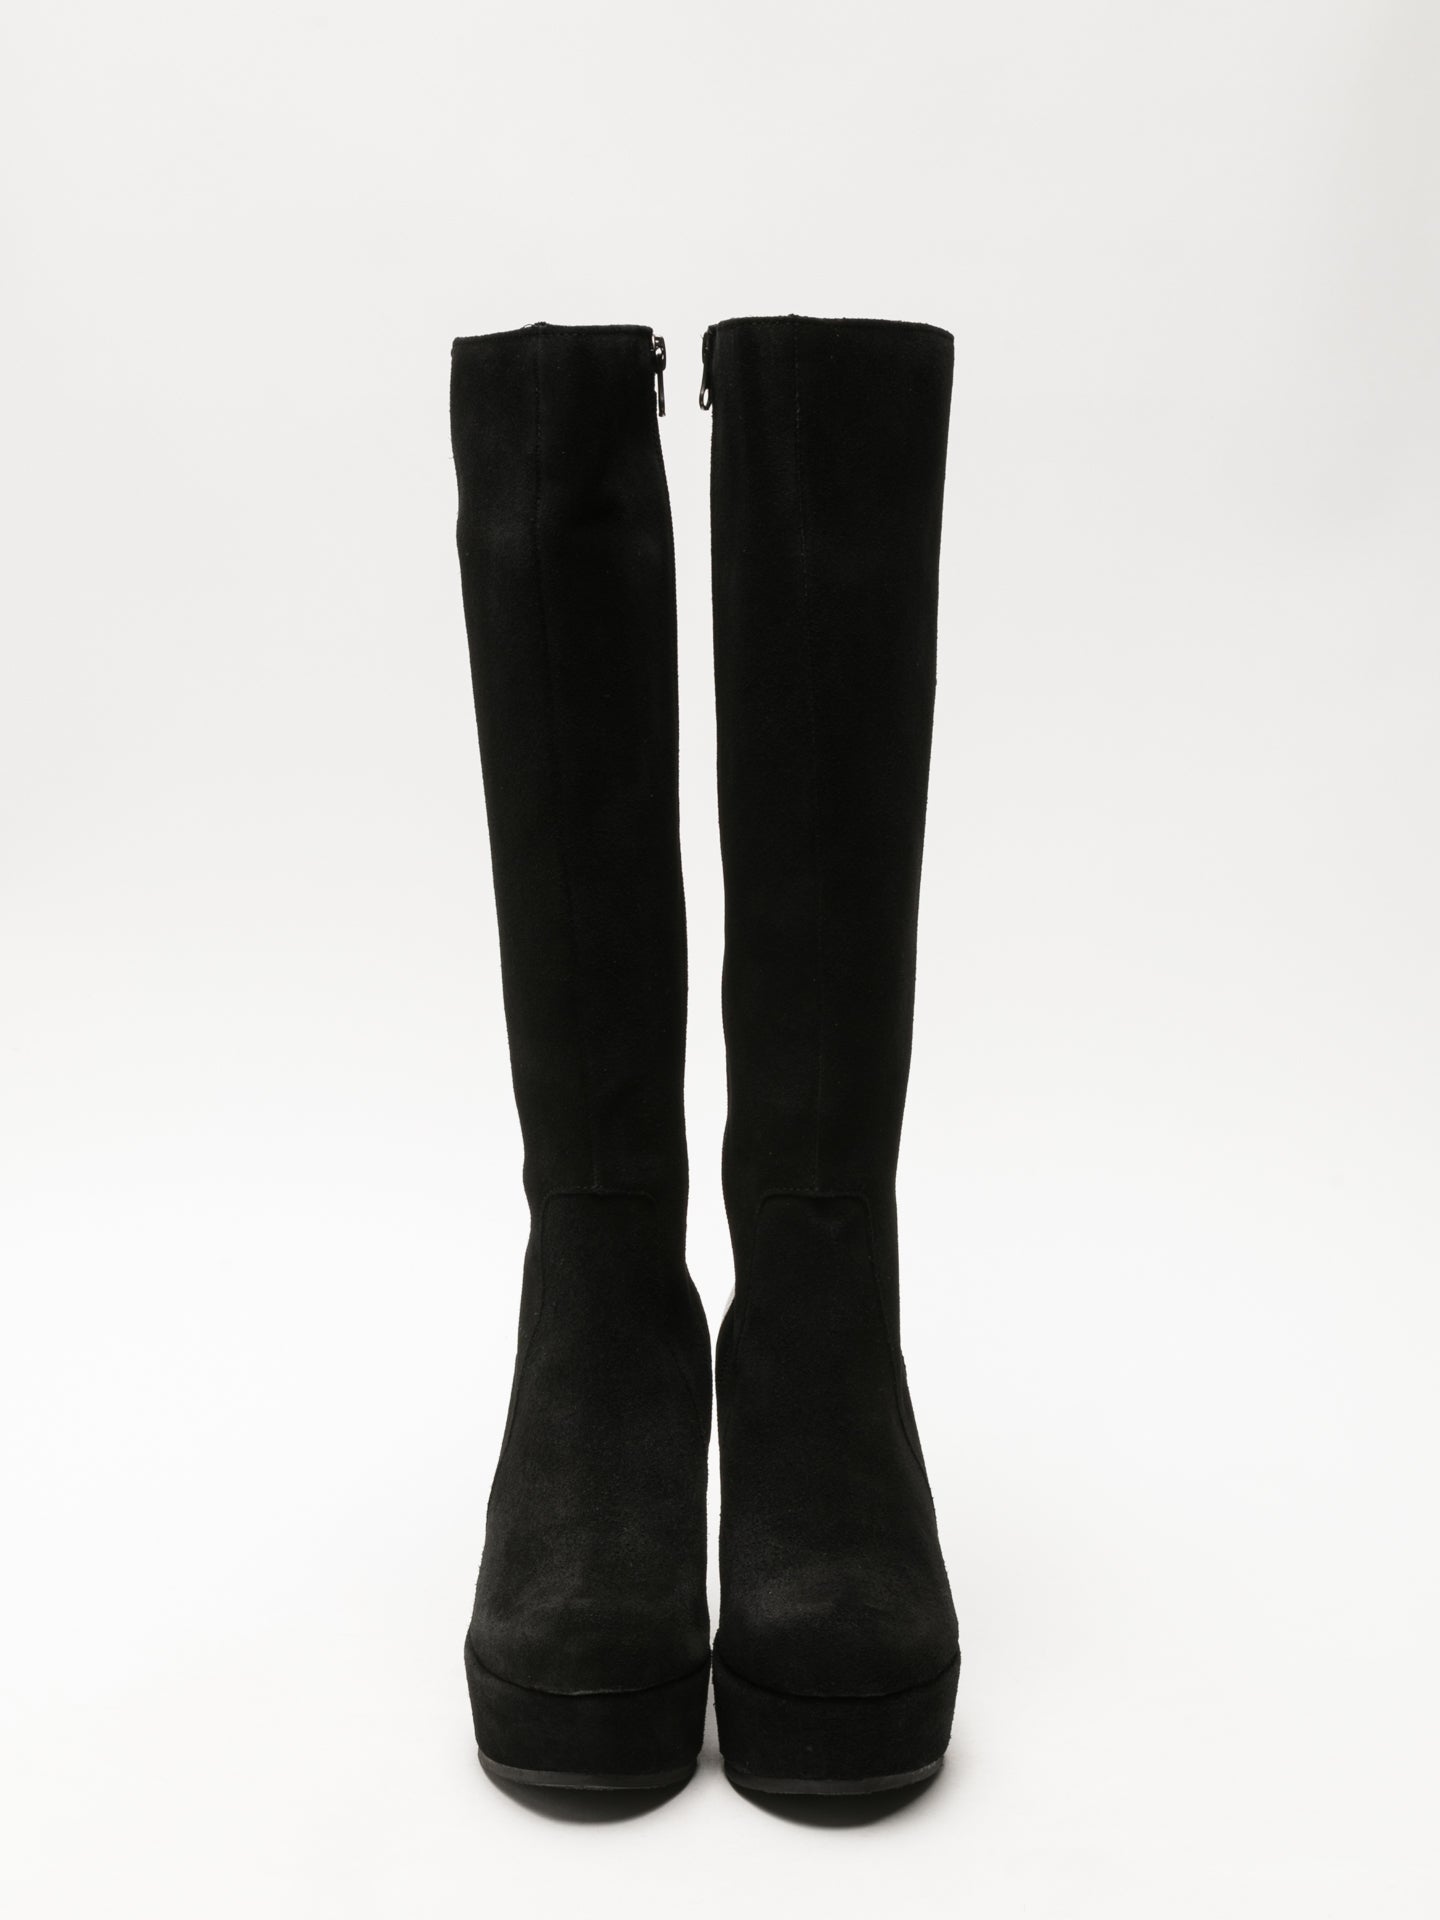 Clay's Black Knee-High Boots